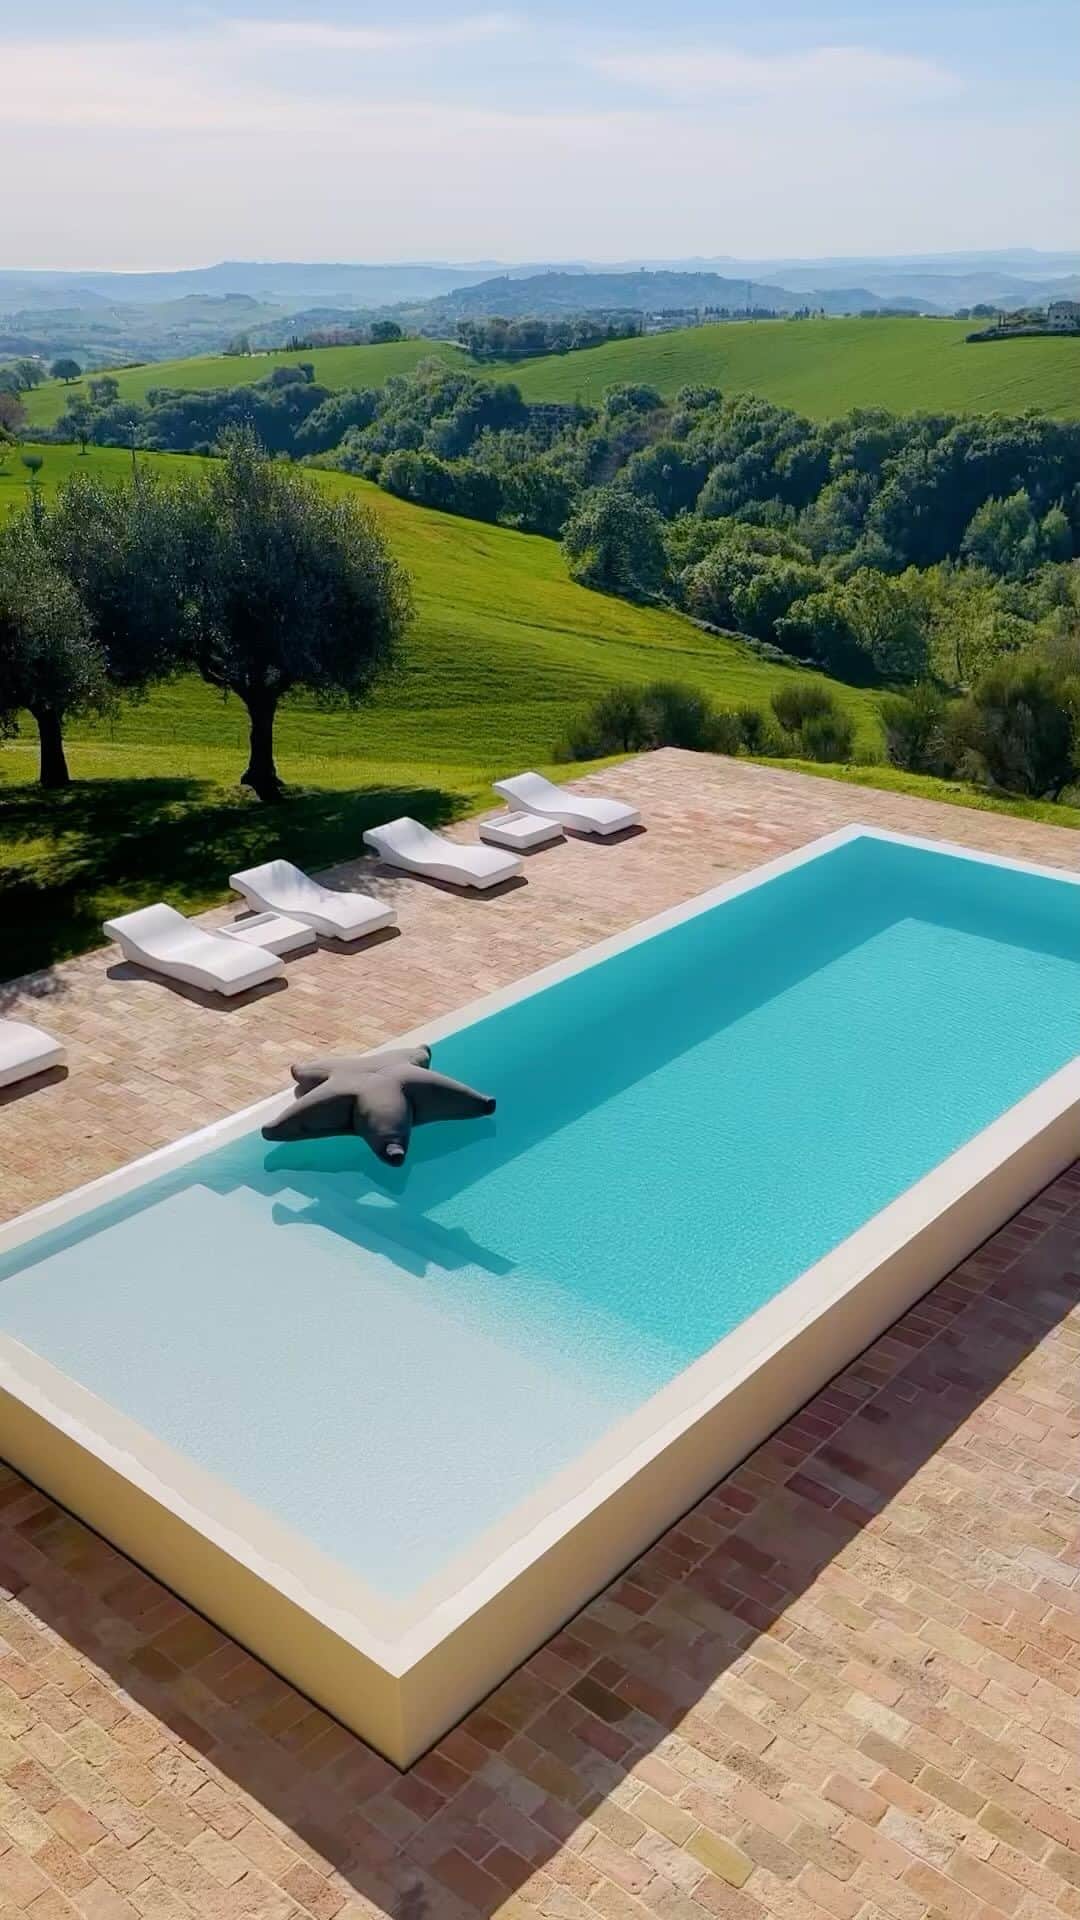 BEAUTIFUL HOTELSのインスタグラム：「Get ready to dive into paradise with @nest.italy and @tavolata.it as they soak up the sun at the stunning Casa Olivi in Marche, Italy. ☀️  Nestled in the breathtaking Marche region, Casa Olivi is a dream farm offering breathtaking views and a perfect blend of tradition and modernity. 🌿 The pool is surrounded by lush greenery and towering trees, creating a serene oasis for relaxation and rejuvenation. 🏊  Can you imagine yourself taking a dip in this tranquil haven? 🌳  📽 @nest.italy @tavolata.it 📍 Casa Olivi, Marche, Italy 🎶 Pop Goes Ambient, Vancouver Sleep Clinic, Amelia Magdalena - Heat Waves」